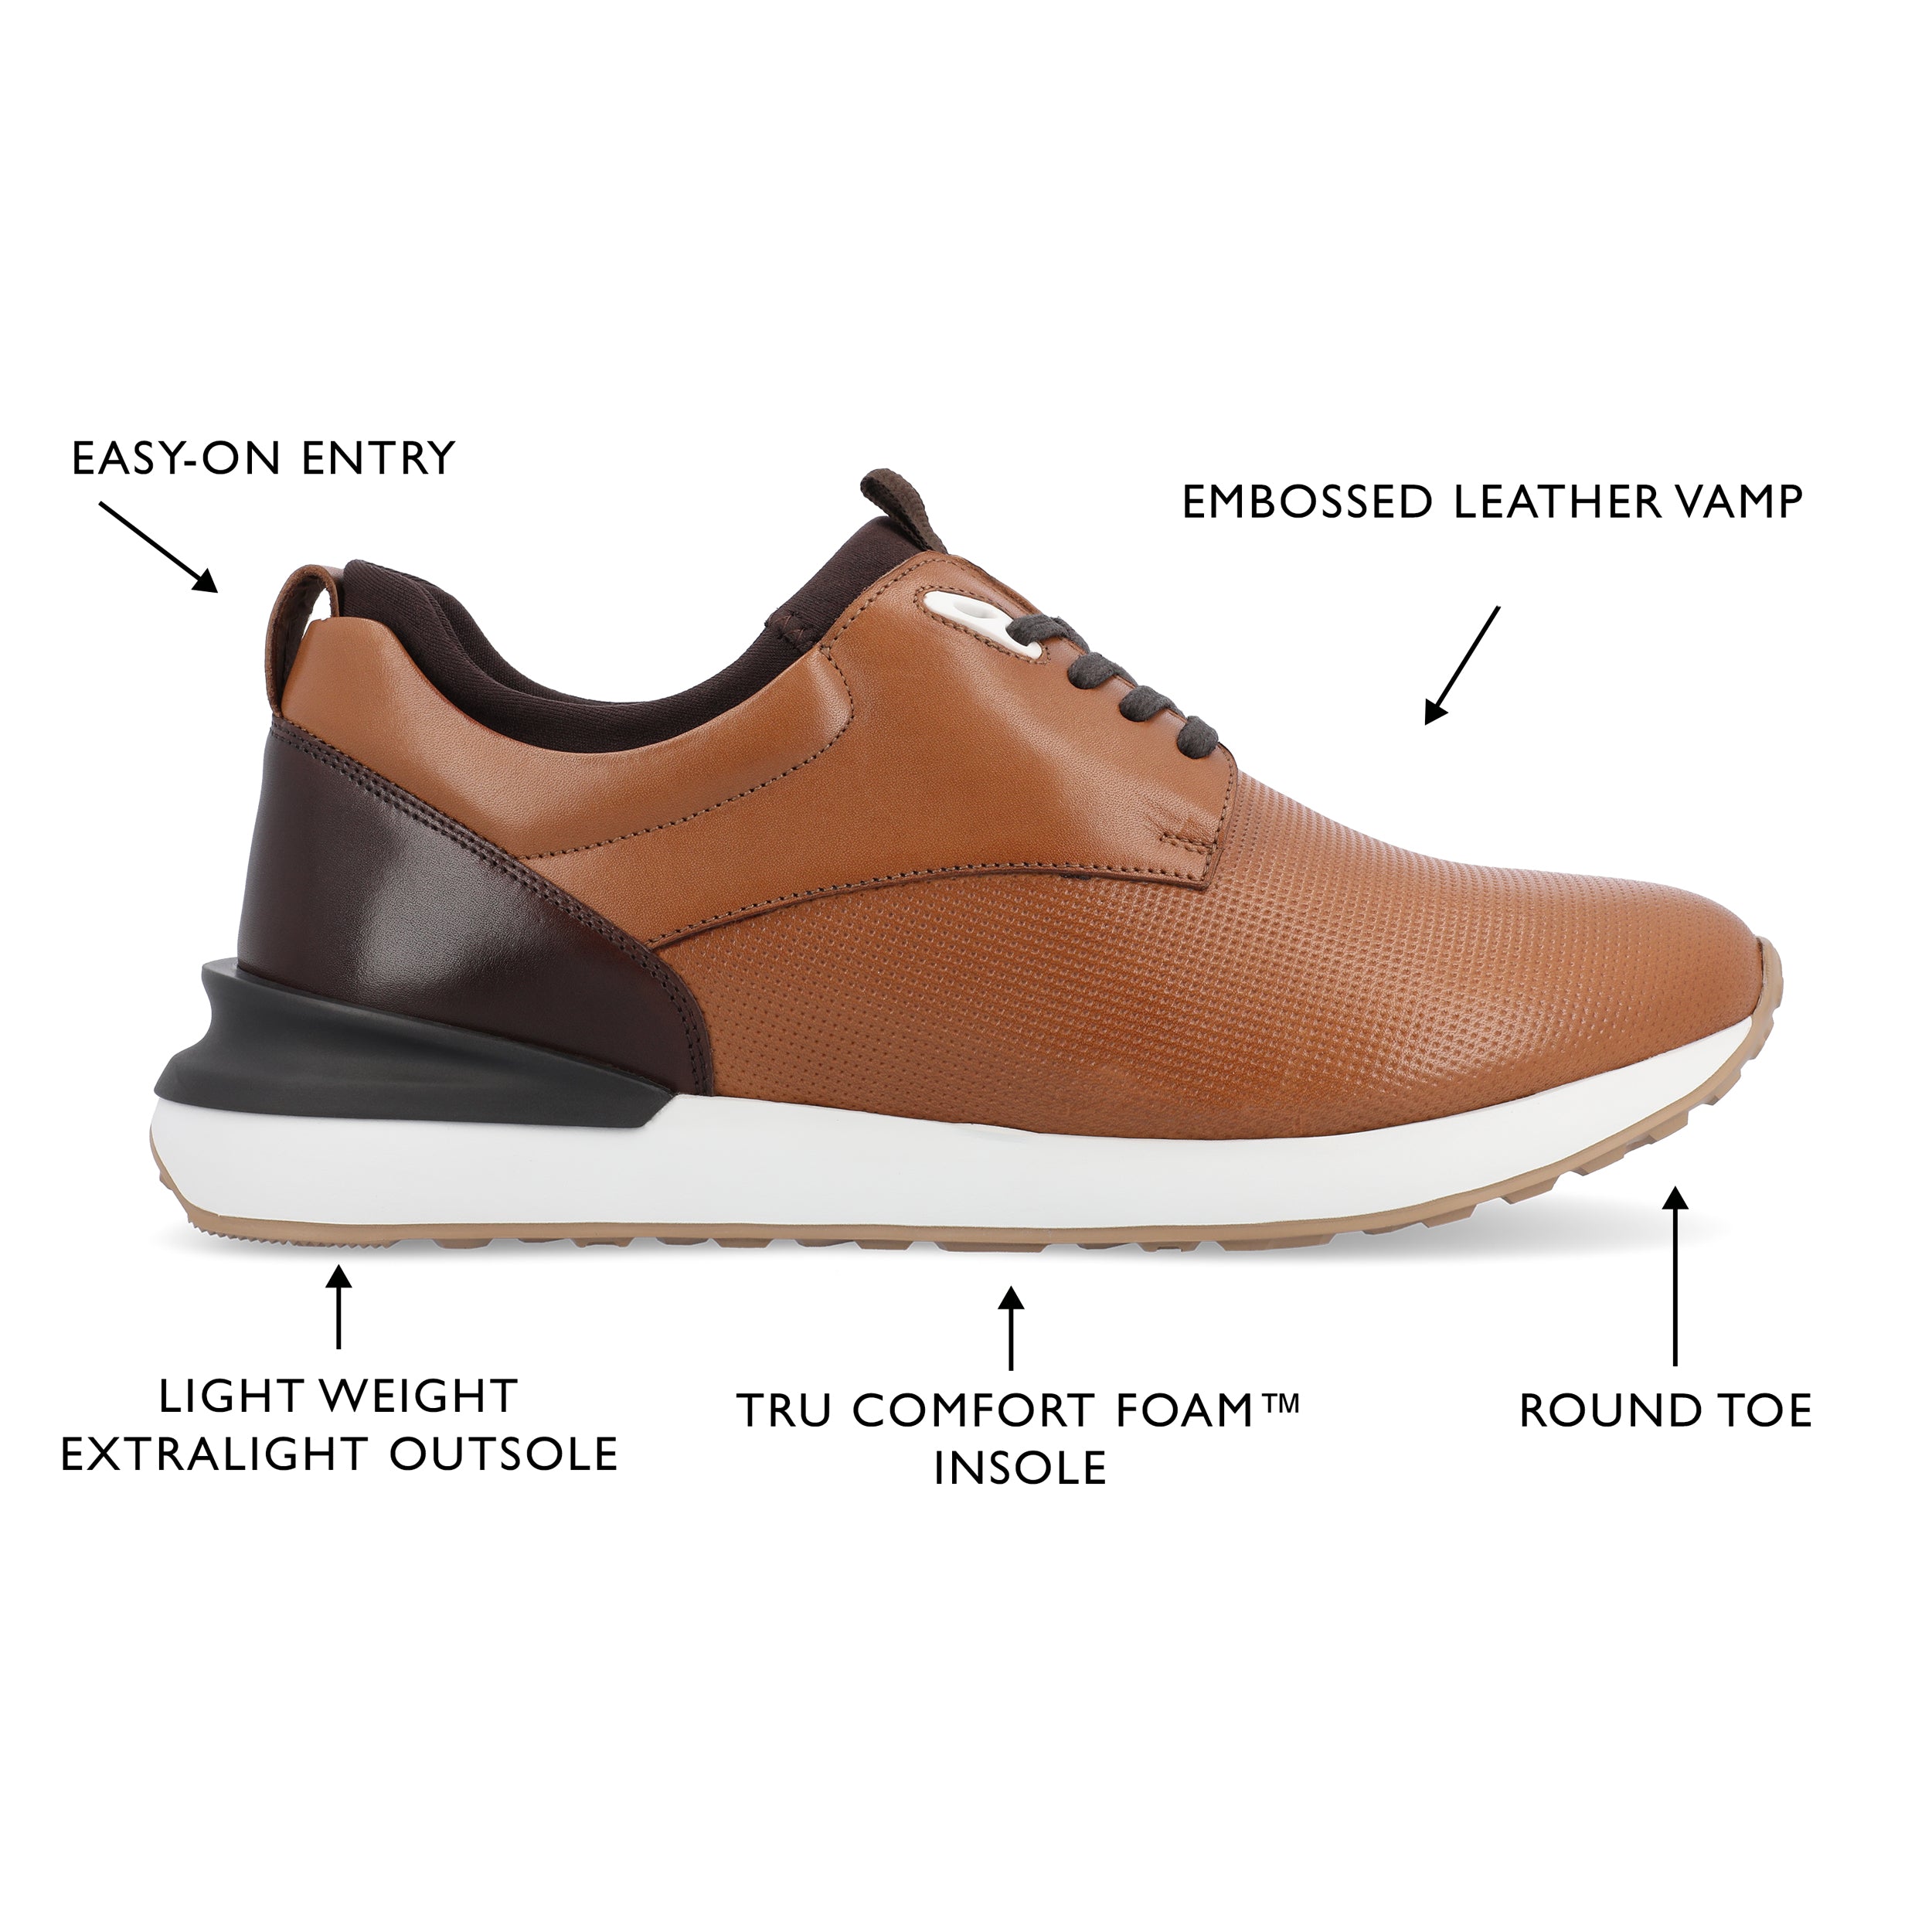 Classic Style Men Lace Up Vintage Leather Shoes Business Casual Shoes  RoundToe Leather Shoes Men Dress Shoes Leather (Brown, 11)